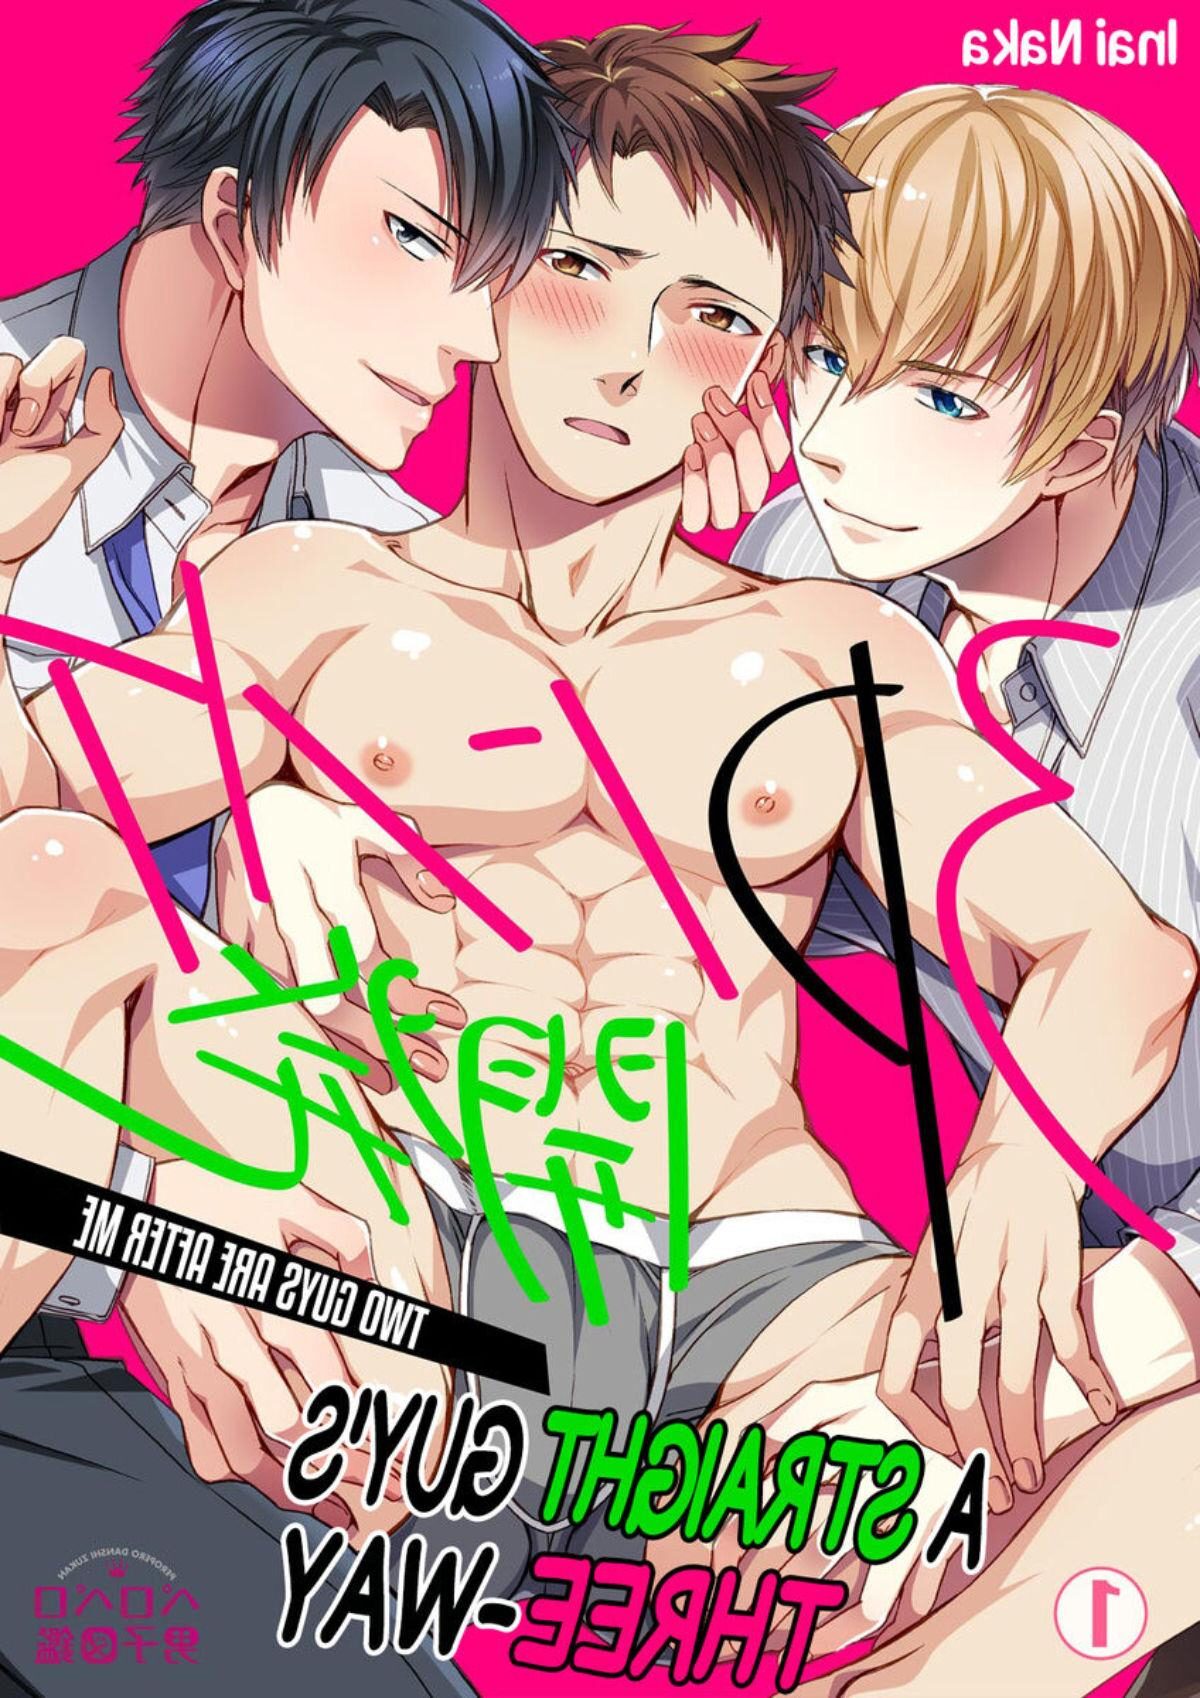 A Straight Guy's Threesome BL Yaoi Adult Manga › orchisasia.org